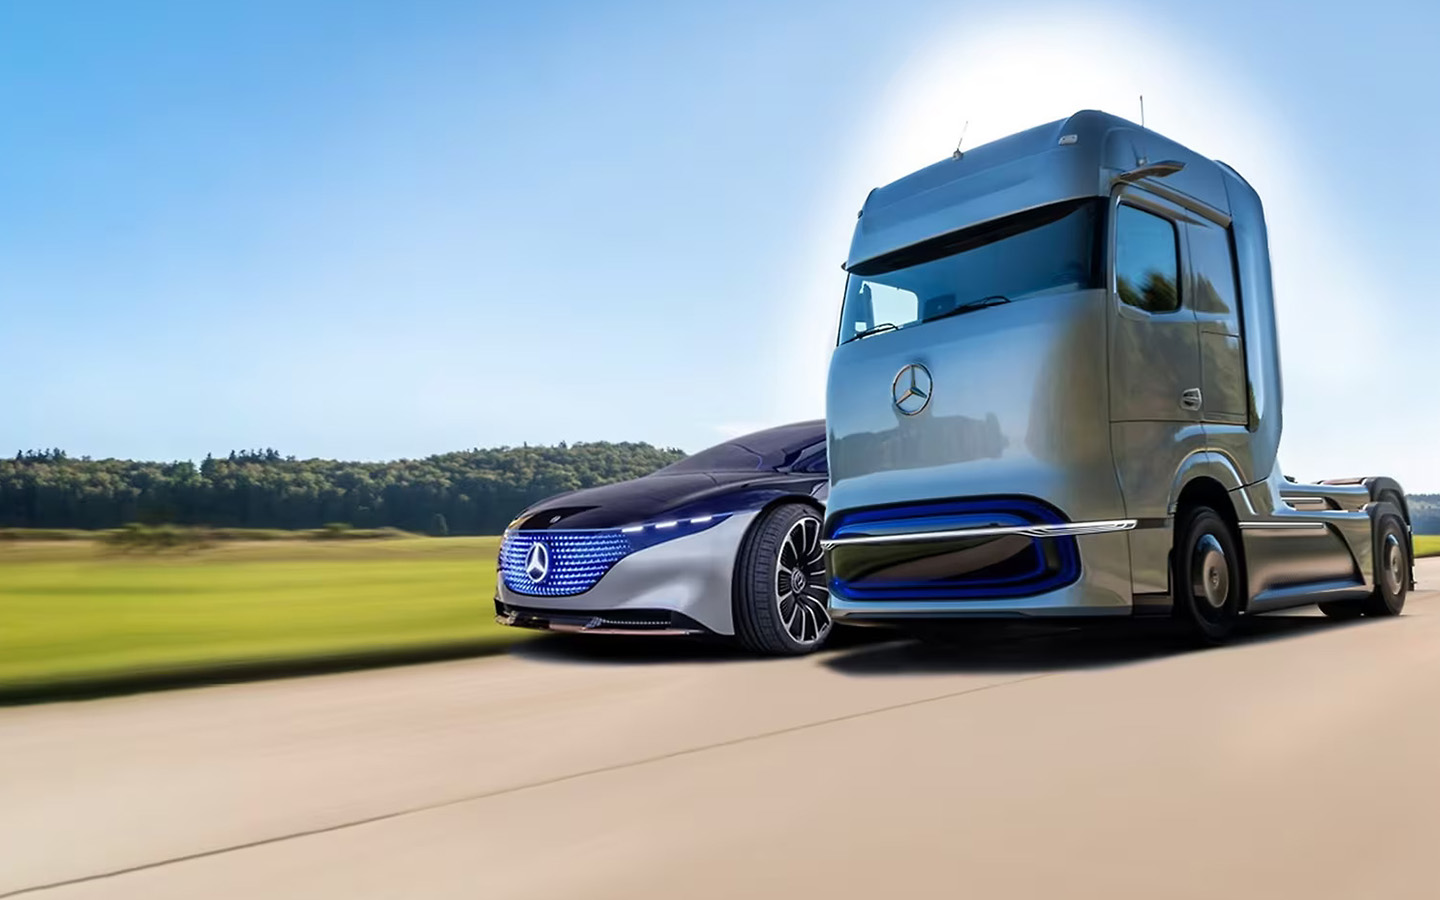 mercedes-benz history shows the brand's entrance into heavy vehicle market